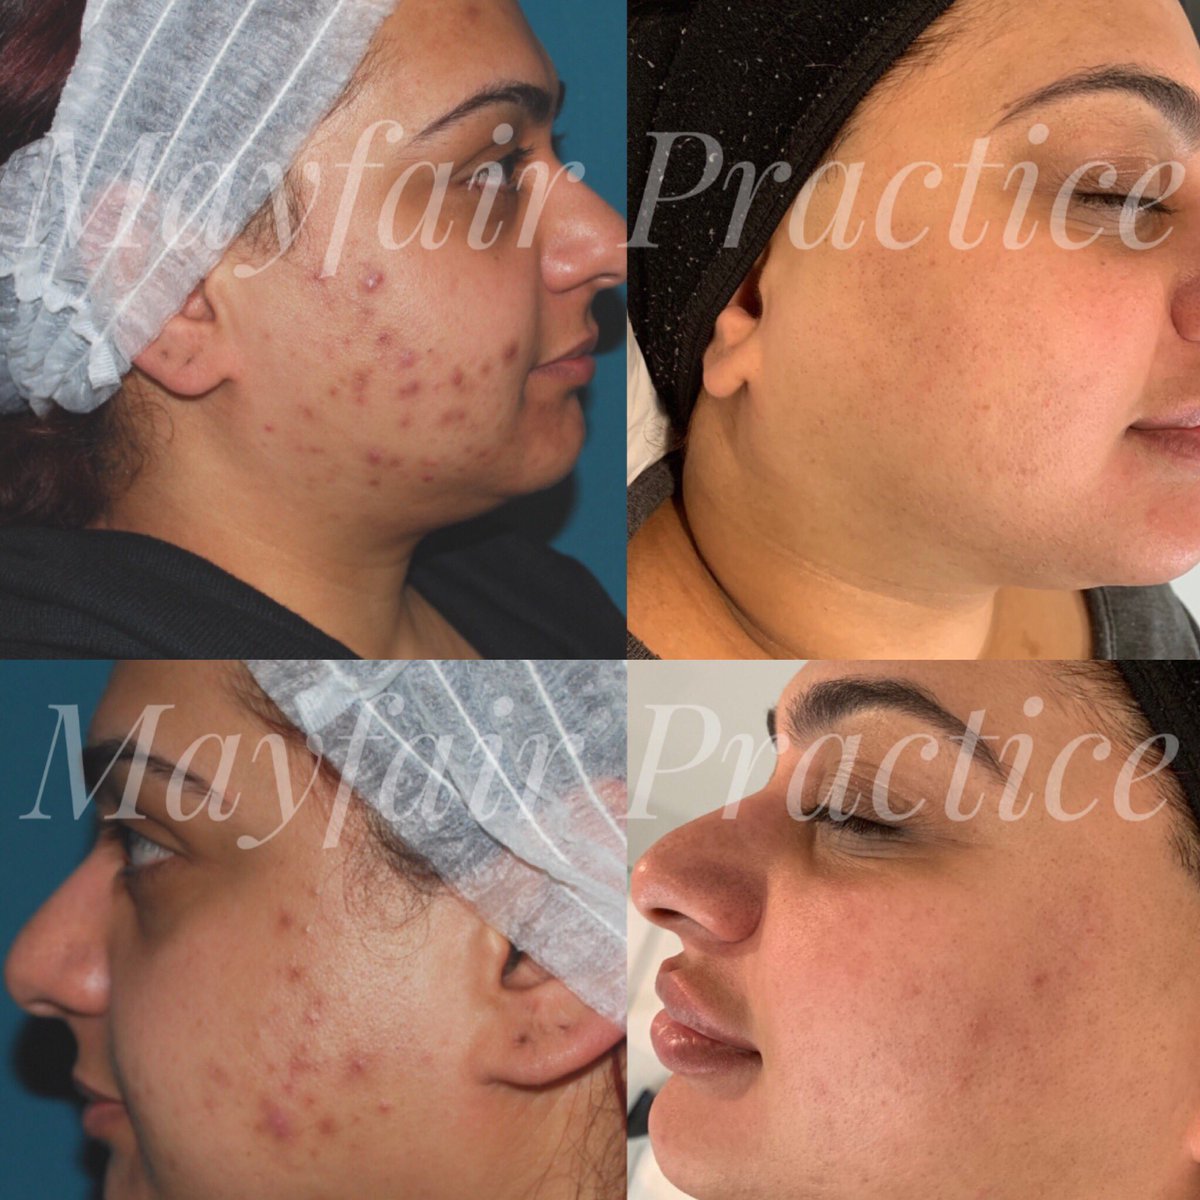 You might not believe us when we tell you that Chandli can work serious magic with skin ✨ We’ll let the pictures do the talking. If you’ve got any skin concerns, make sure to book your consultation with Chan 🤩 mayfairpractice.co.uk